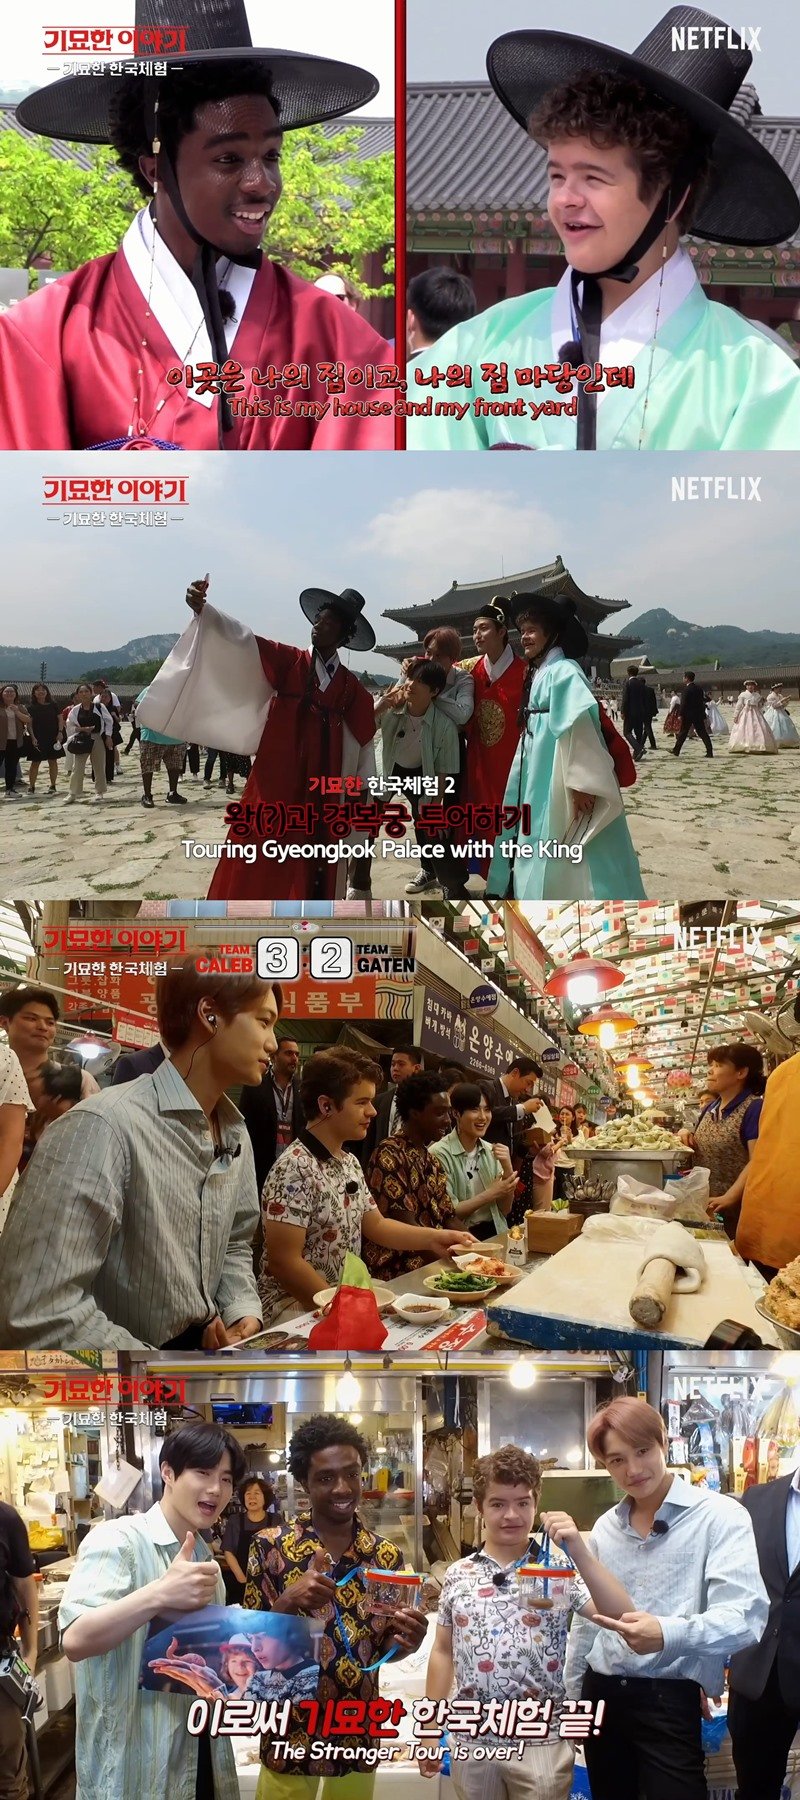 Strange Story 3 recently released a video of Strange Korea Experience by Gayton Matarazo as Dustin and Caleb McLaughlin as Lucas.The two people who visited Seoul with Suho and Kai in June last year experienced Korea from Gyongbokgung to Gwangjang Market.The public footage begins with the appearance of Gayton and Caleb in Gyeongbokgung dressed in hanbok.At this time, Suho and Kai appear and meet for the first time by greeting the radio, which is the trademark of Hawkinss master in the strange story.Those who greeted me with a special time looking back at Gyeongbokgung and Gyeonghoeru.Gayton and Caleb, who have been impressed with the beauty of Koreas elegant old palace, moved to the Gwangjang Market and continued the weird Korea experience.If you put the beauty of Korea in Gyeongbokgung with your eyes, you experienced the unique taste of Korea in Gwangjang Market.They teamed up with Gayton & Kai, Caleb & Suho to perform a mission to find a baby demogorgon dart in a bizarre story.The four people who showed the food at the designated store to get hints tasted various Korean foods such as bean cake, dumplings, and kimbap and raised their thumbs.The two teams continued their tight confrontation, and Gayton, Caleb, Suho and Kai, who introduced the new chemistry, finished the strange Korea experience in a short time, but they finished it.Strange Story 3 released on the 4th is a Netflix original series that deals with more strange events in Hawkins village, which is once again summer in 1985, a year later.Four days after its release, 40.7 million households watched.